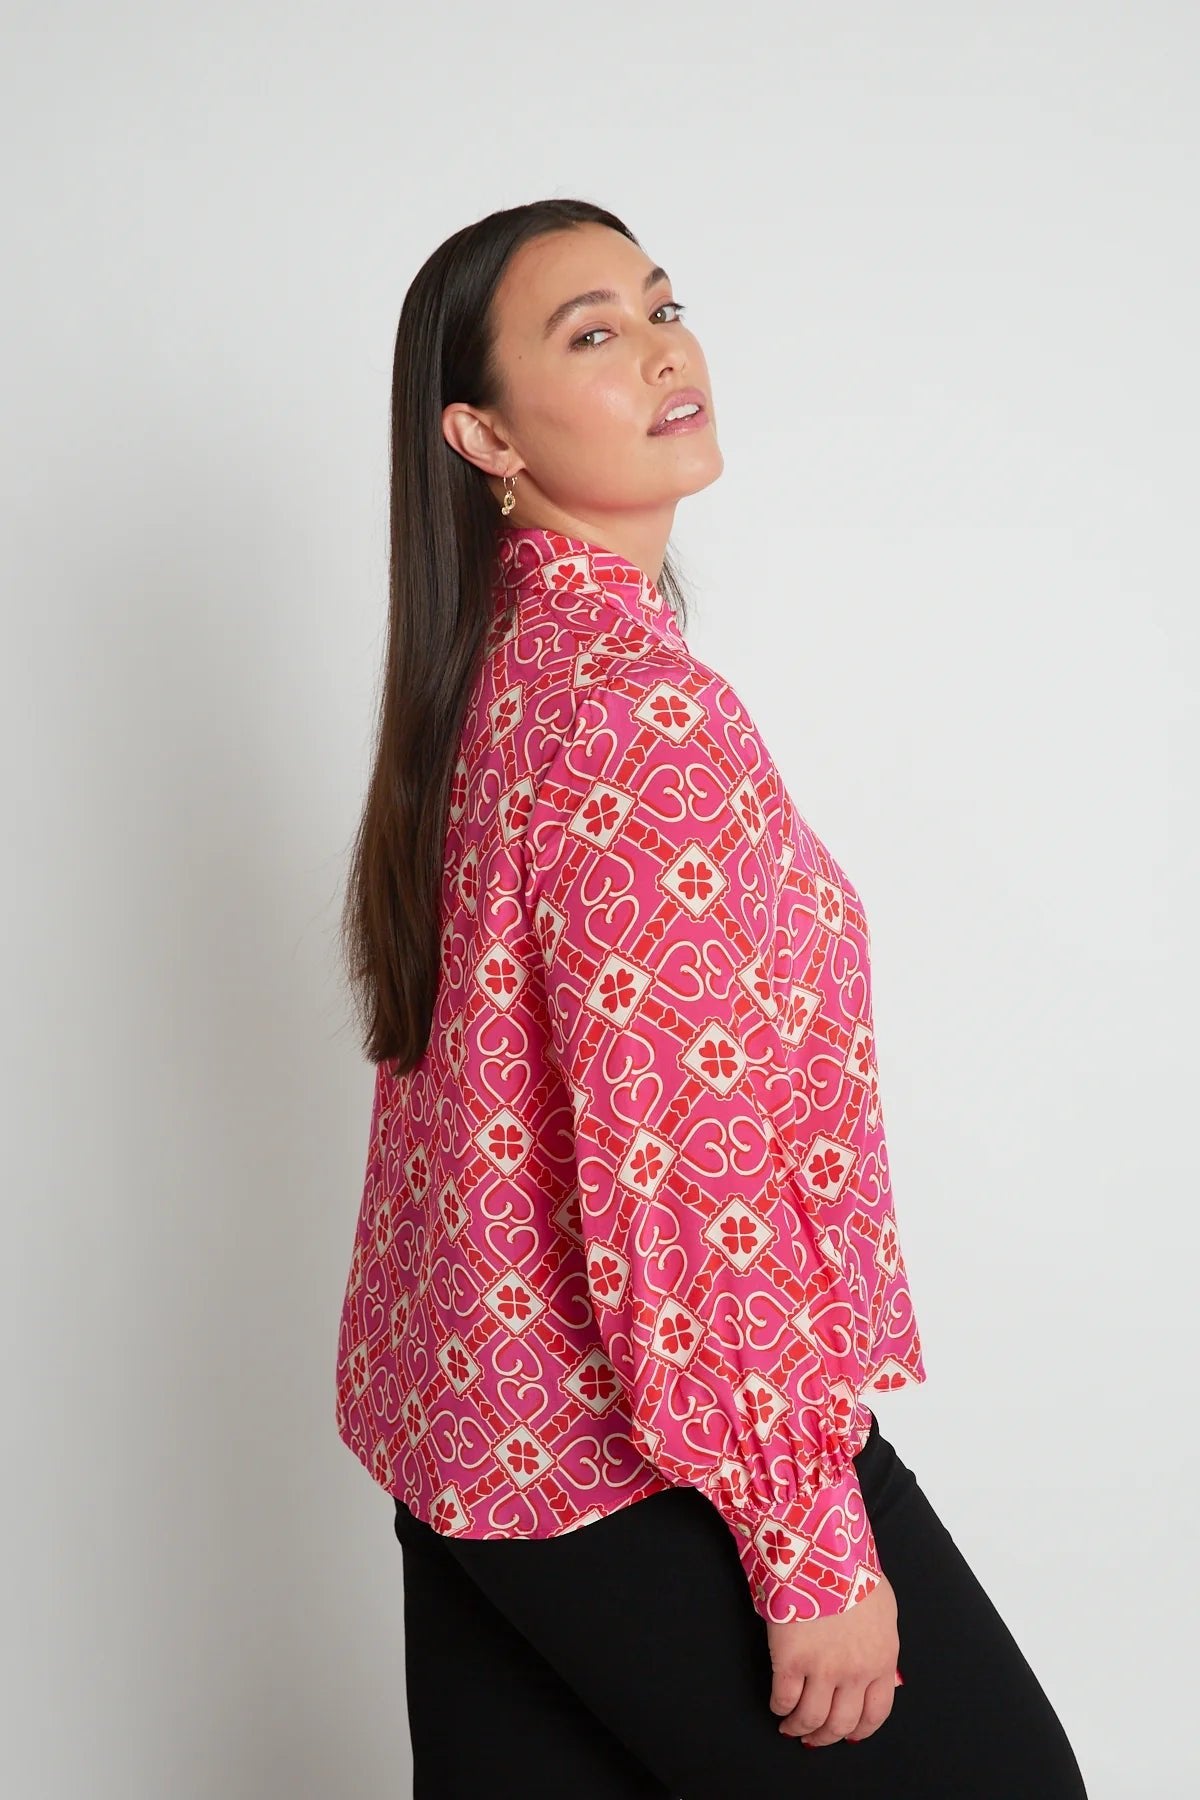 twenty-seven names | Unchained Melody Shirt | Magenta Hearts | Palm Boutique